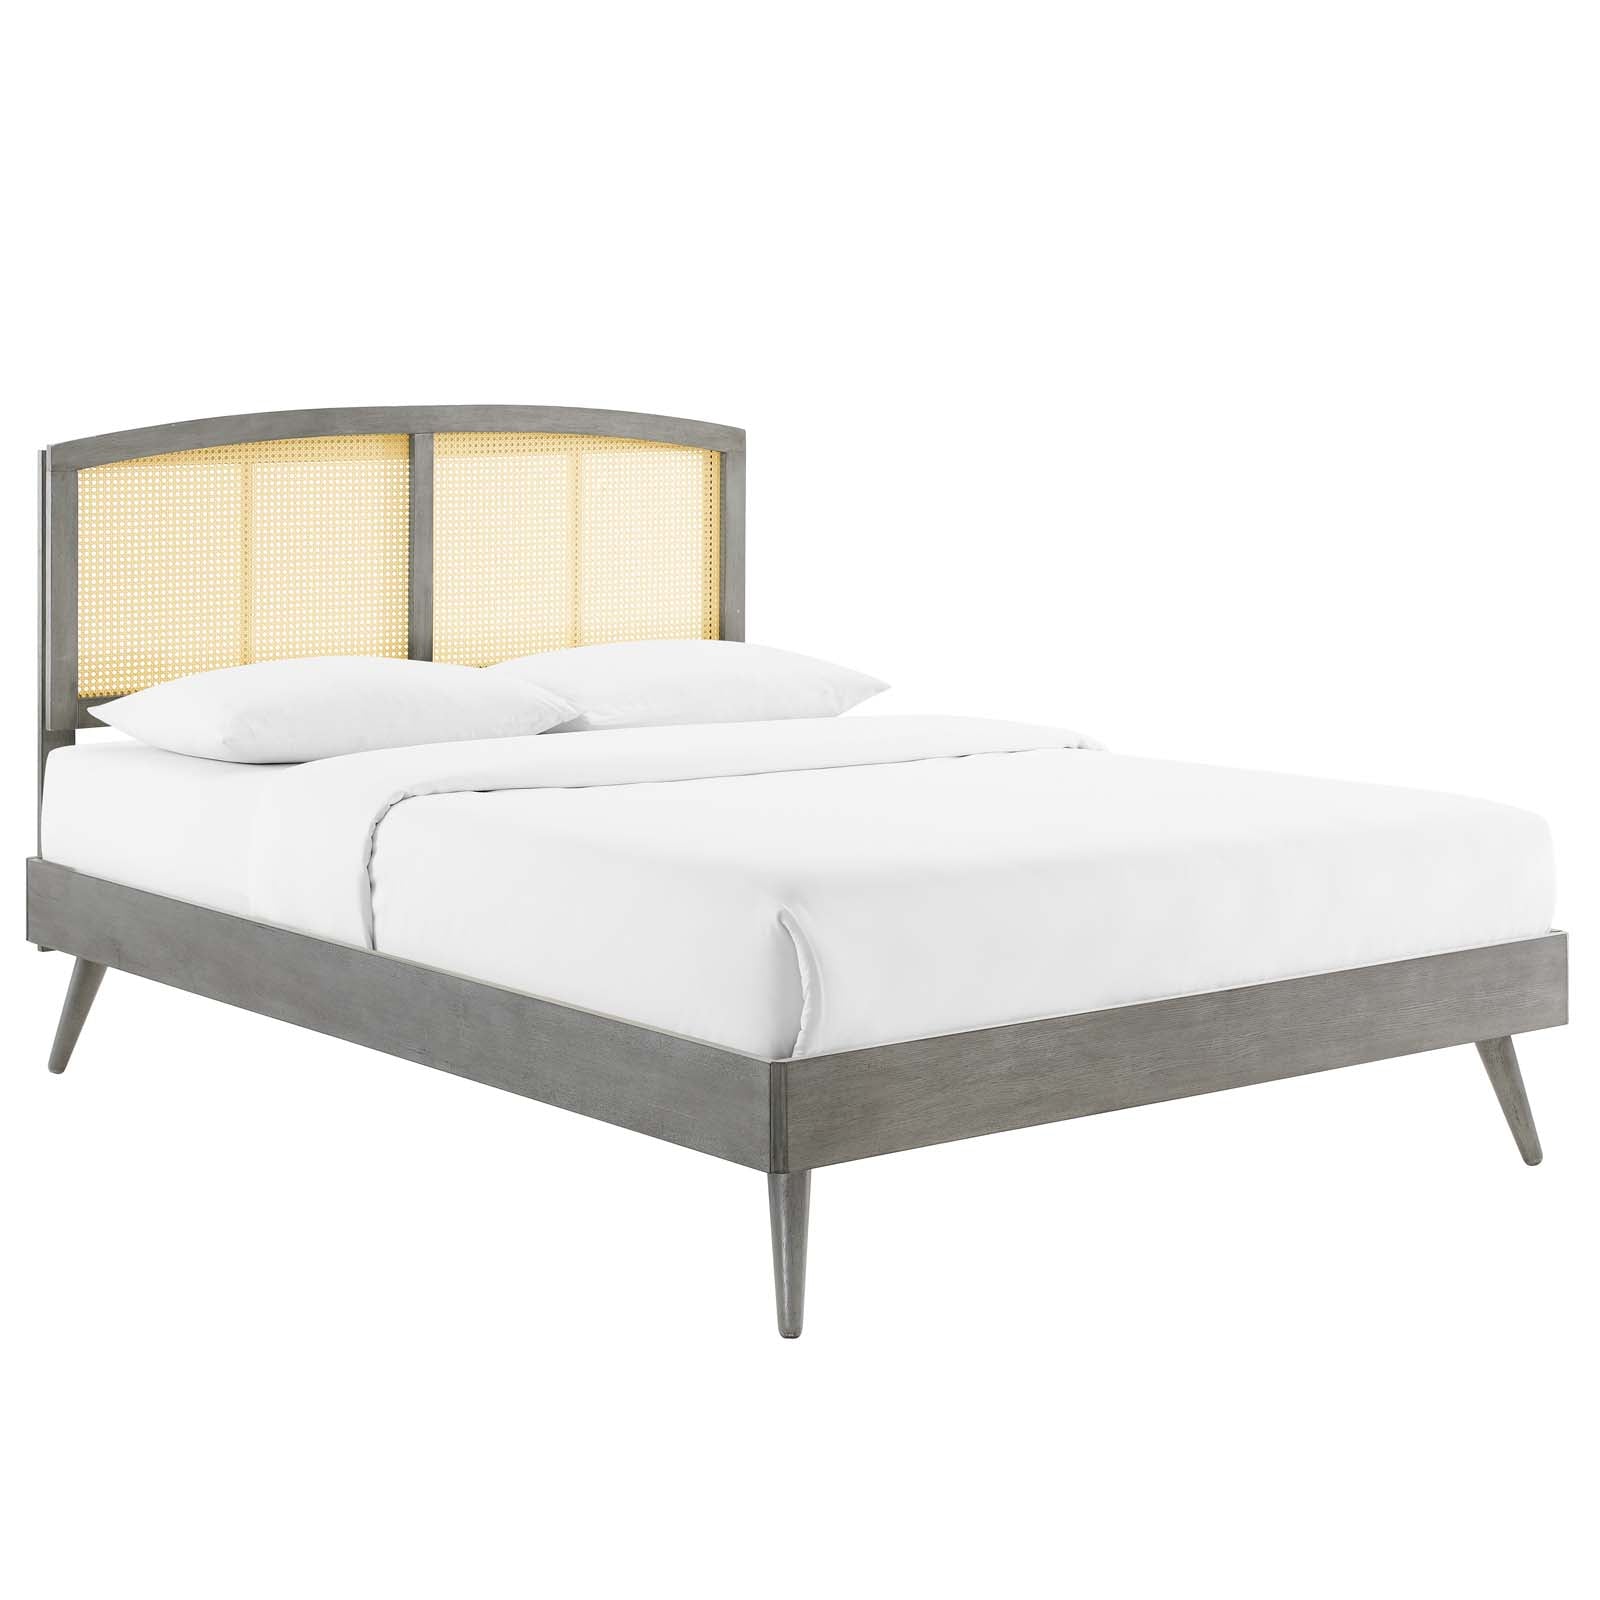 Sierra Cane and Wood Full Platform Bed With Splayed Legs - East Shore Modern Home Furnishings